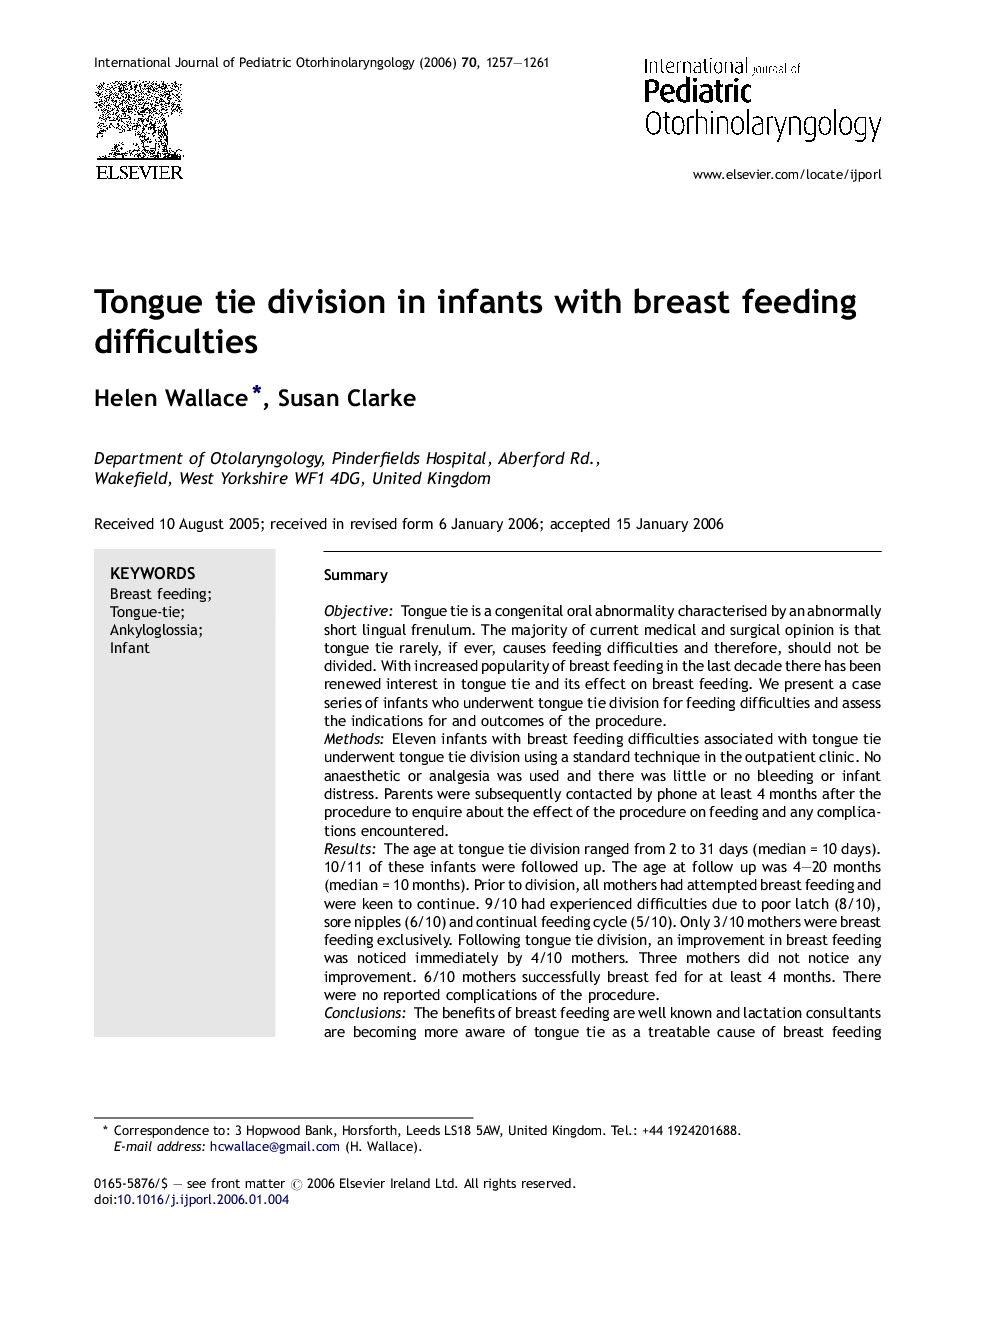 Tongue tie division in infants with breast feeding difficulties